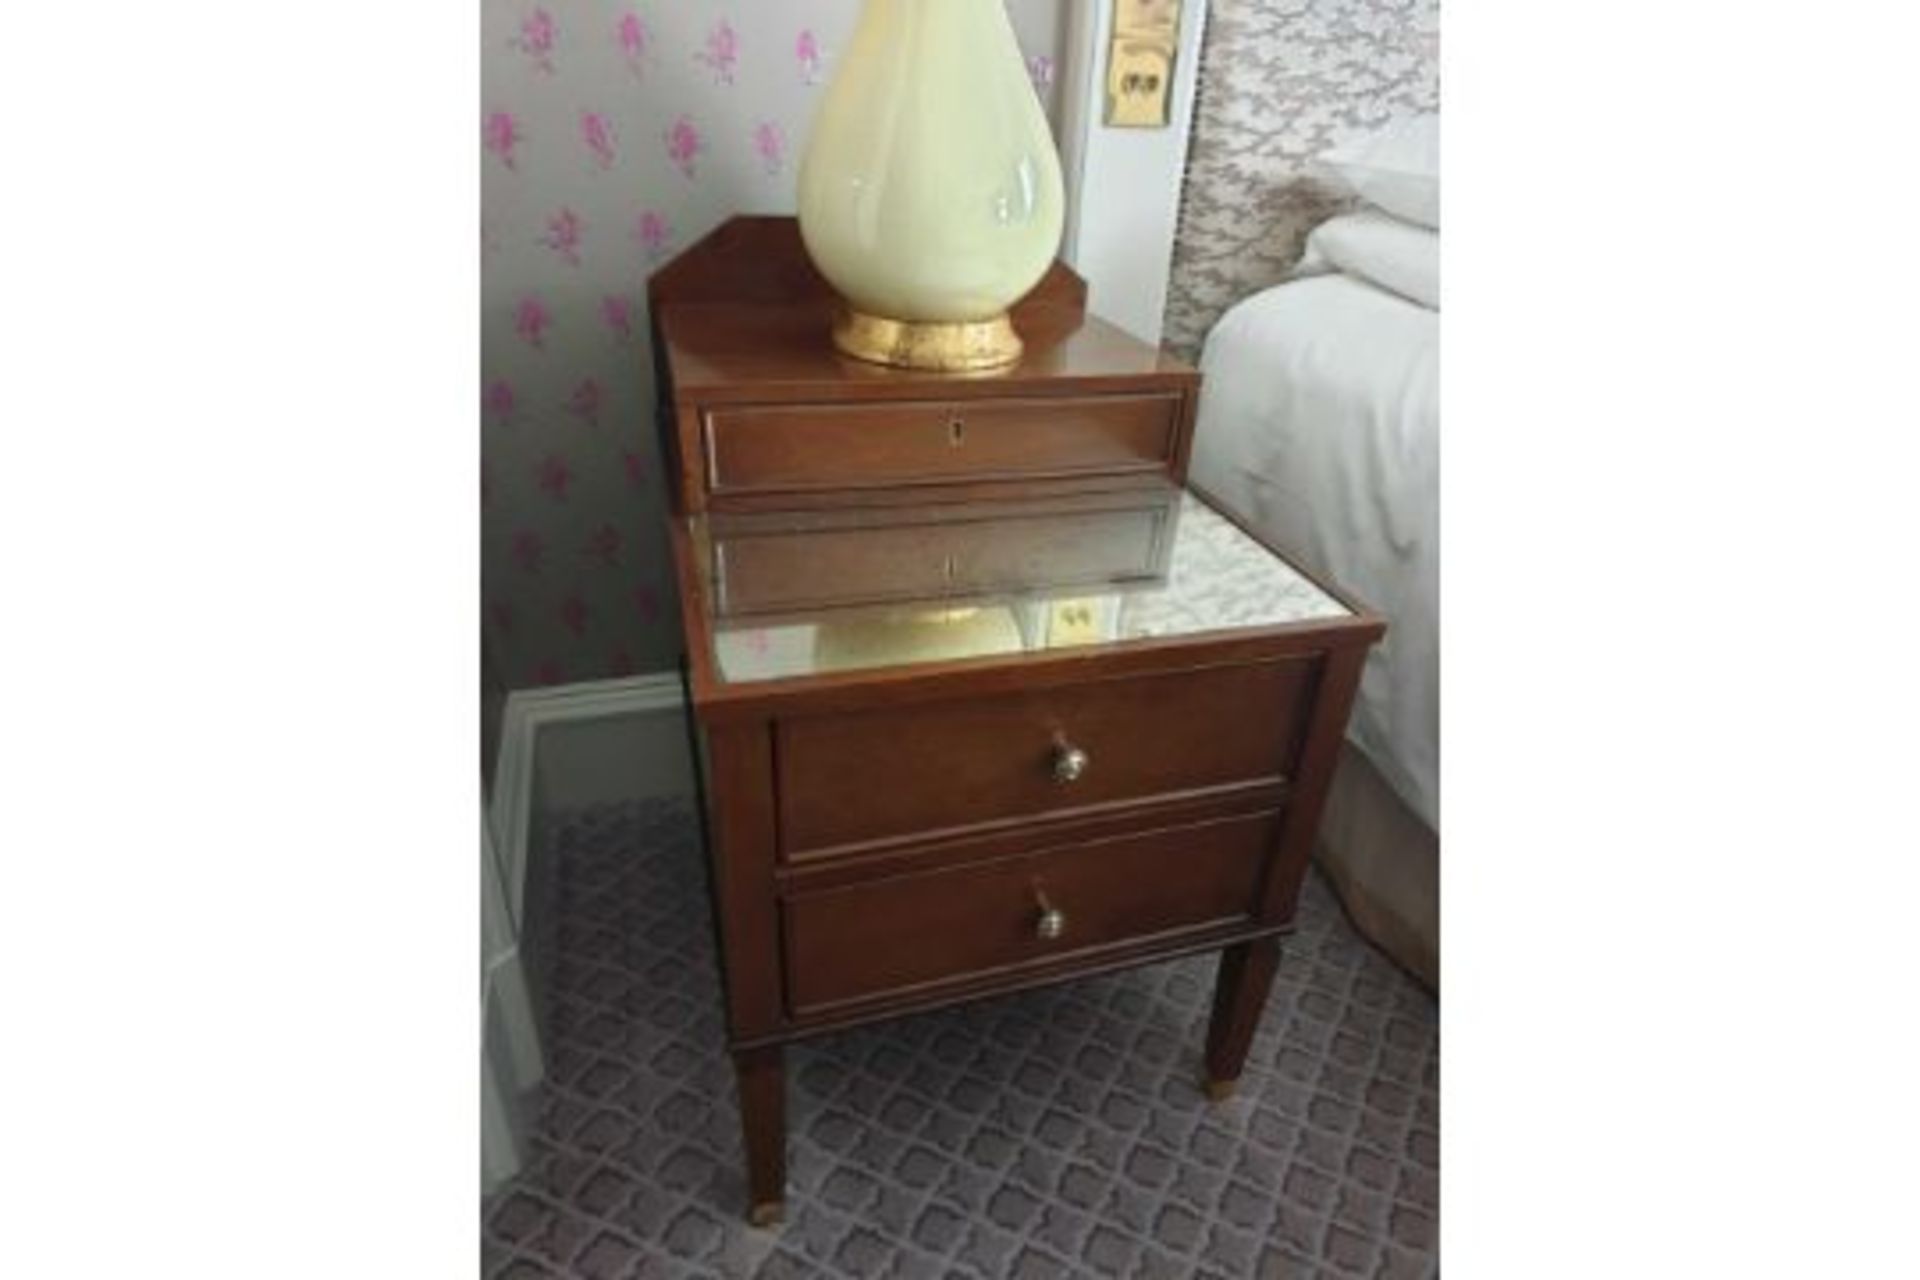 A Pair Of Two Tier Bedside Nightstands With Antiqued Plate Top With Storage Compartments Mounted - Bild 3 aus 3